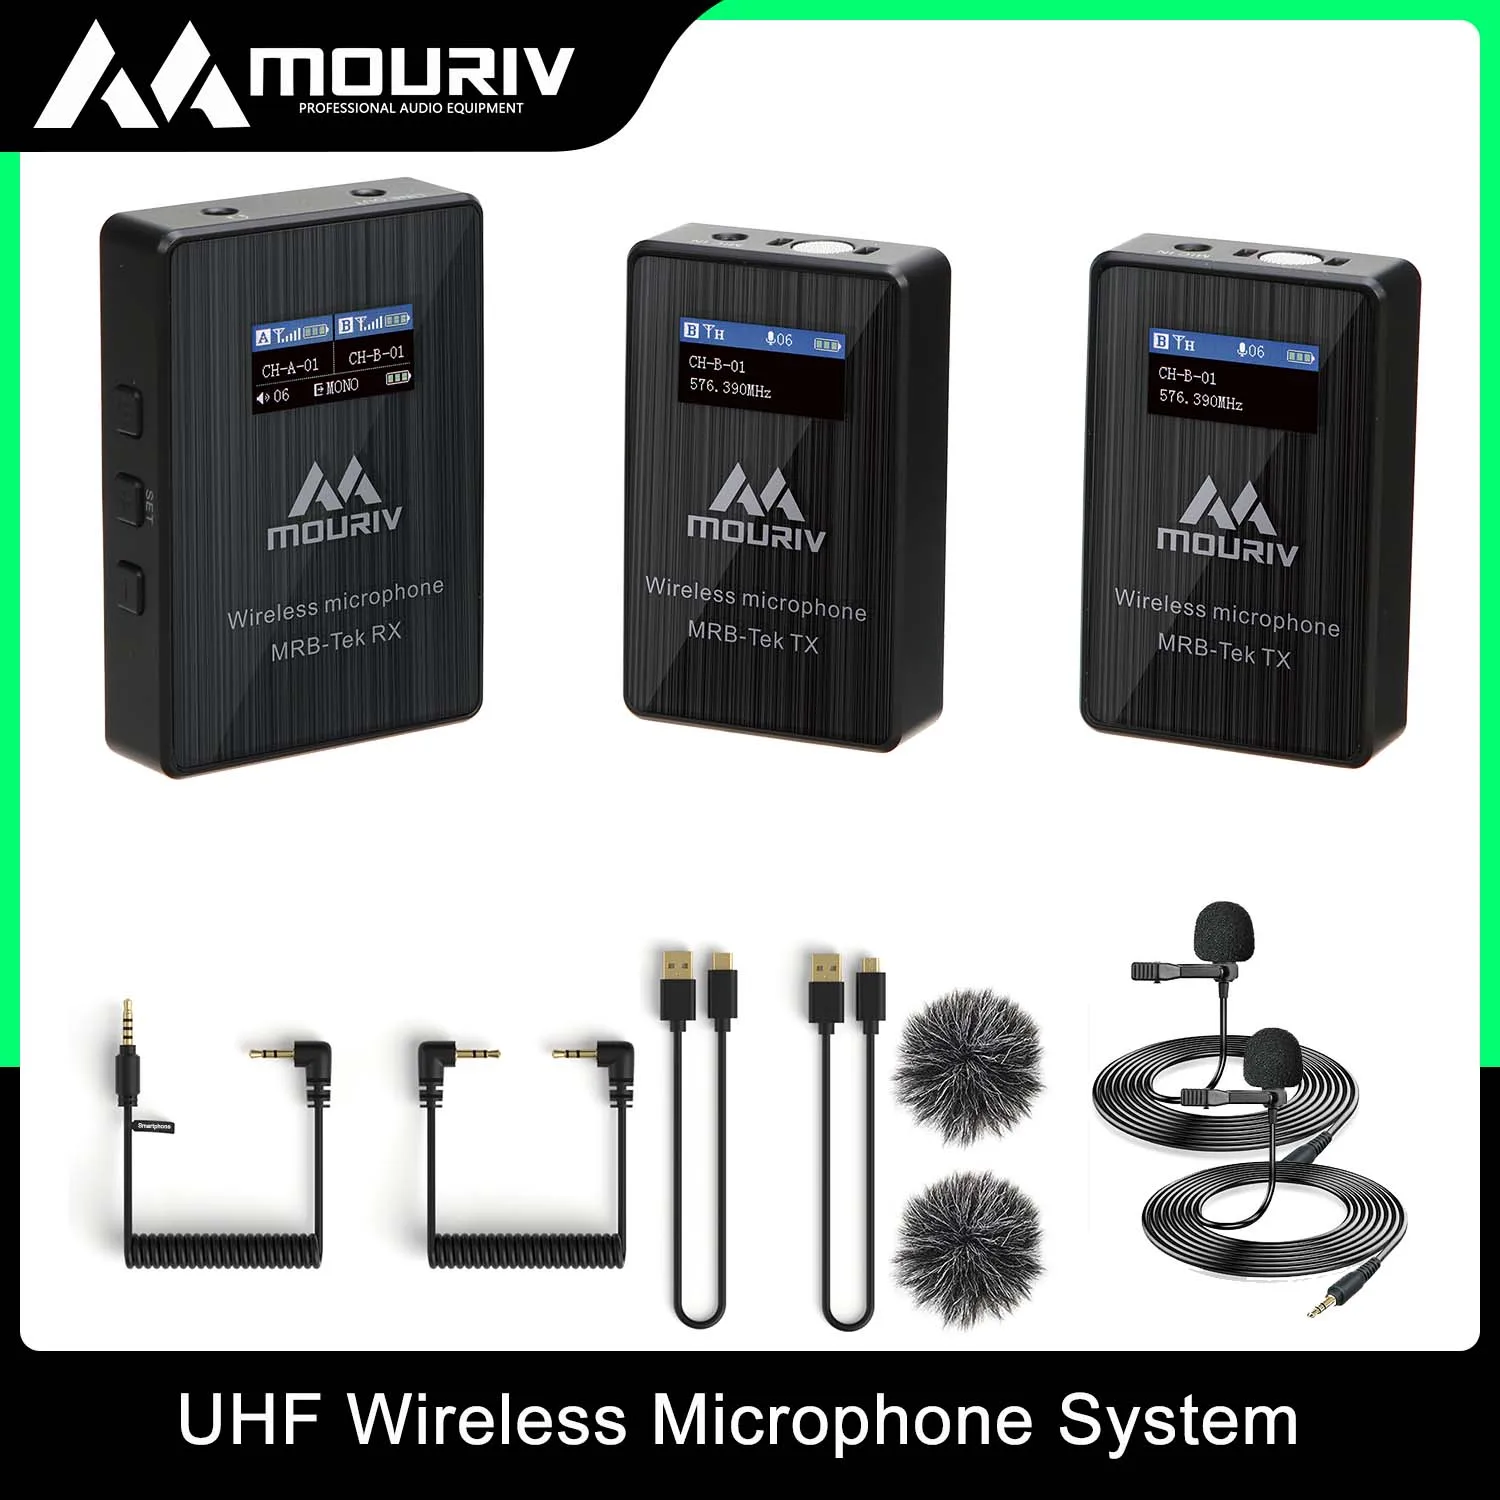 

MOURIV MRB-Tek UHF Wireless Microphone System for to DSLRs, Mirrorless and video Cameras, Smartphones, Tablets, Computers